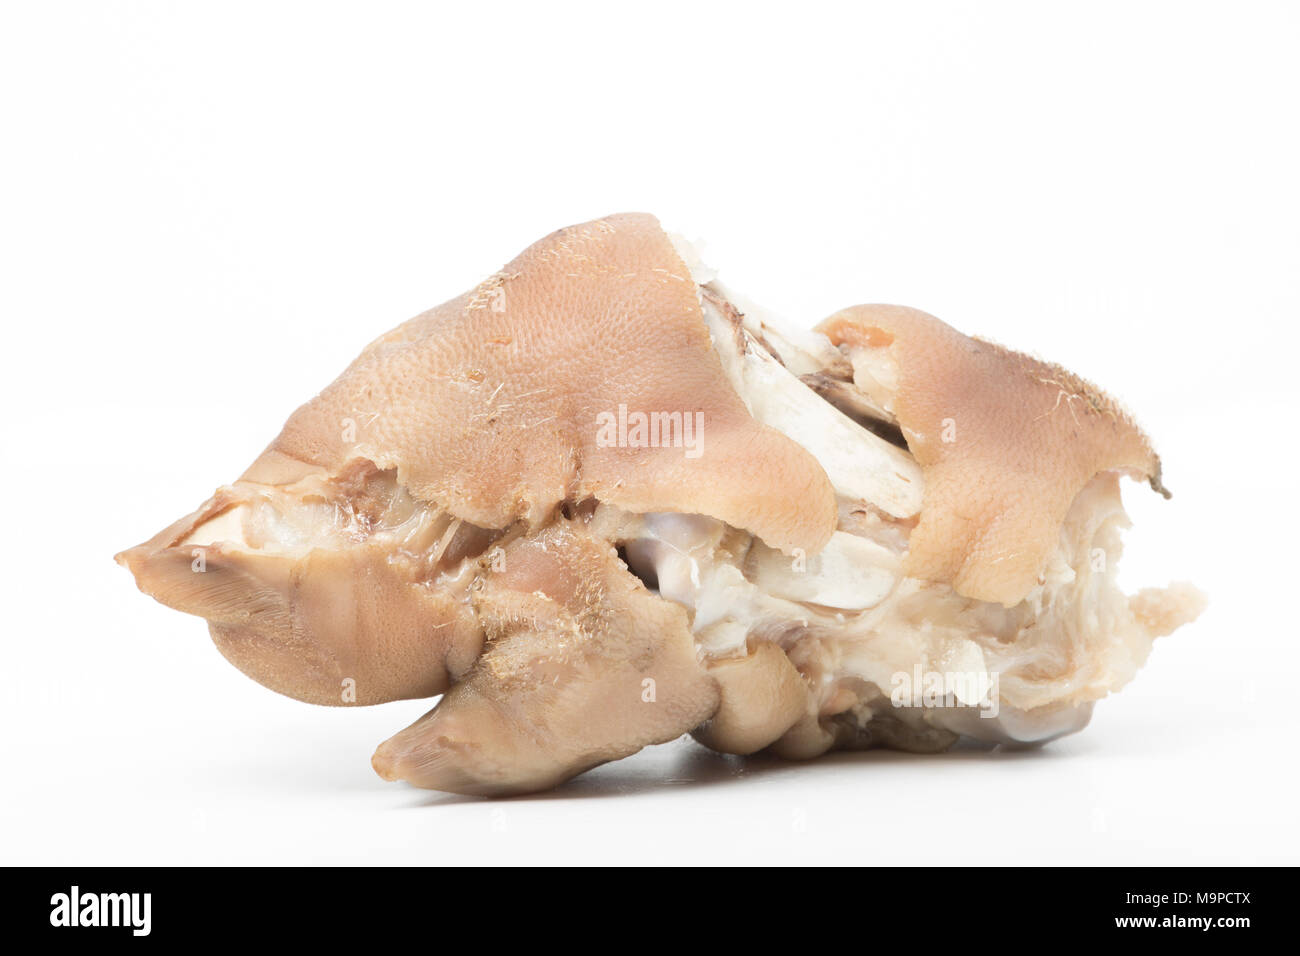 Pigs trotters that have been boiled until tender and left to cool before being eaten with a splash of vinegar UK. Pigs trotters are rich in collagen. Stock Photo